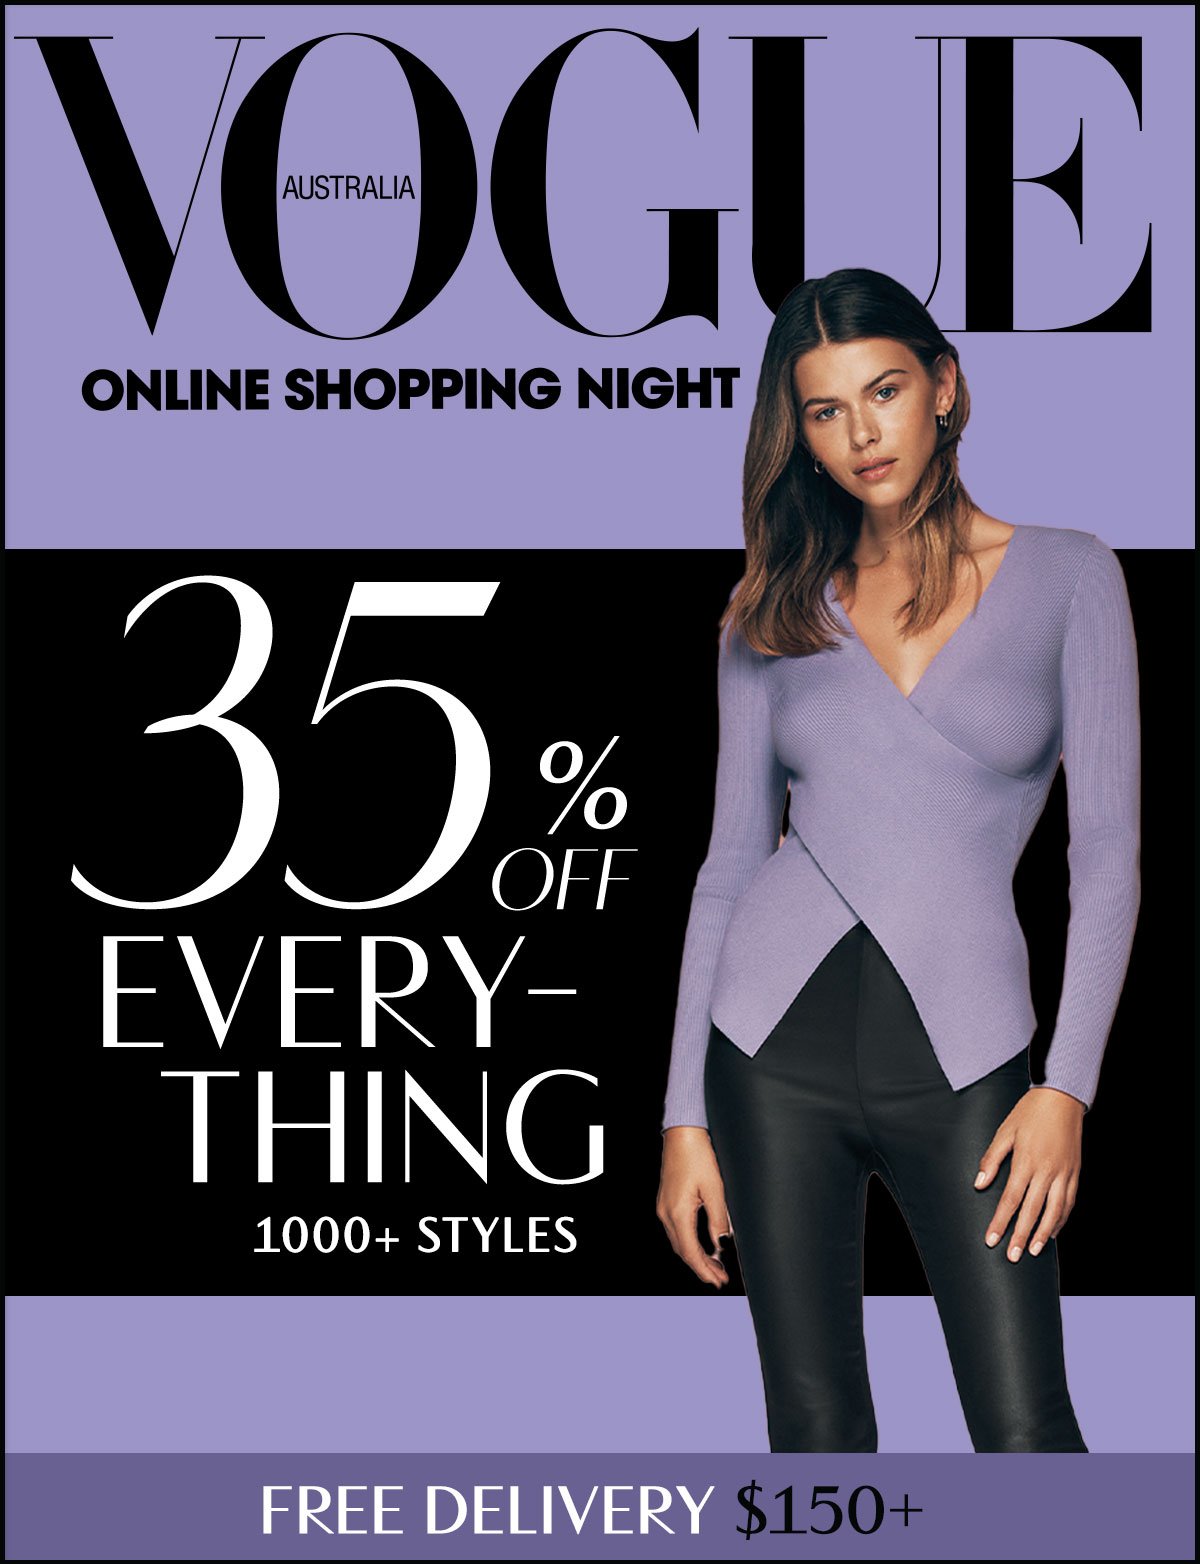 Vogue Australia. Online Shopping Night. 35% Off Everything. 1000+ Styles. Free Delivery $150+